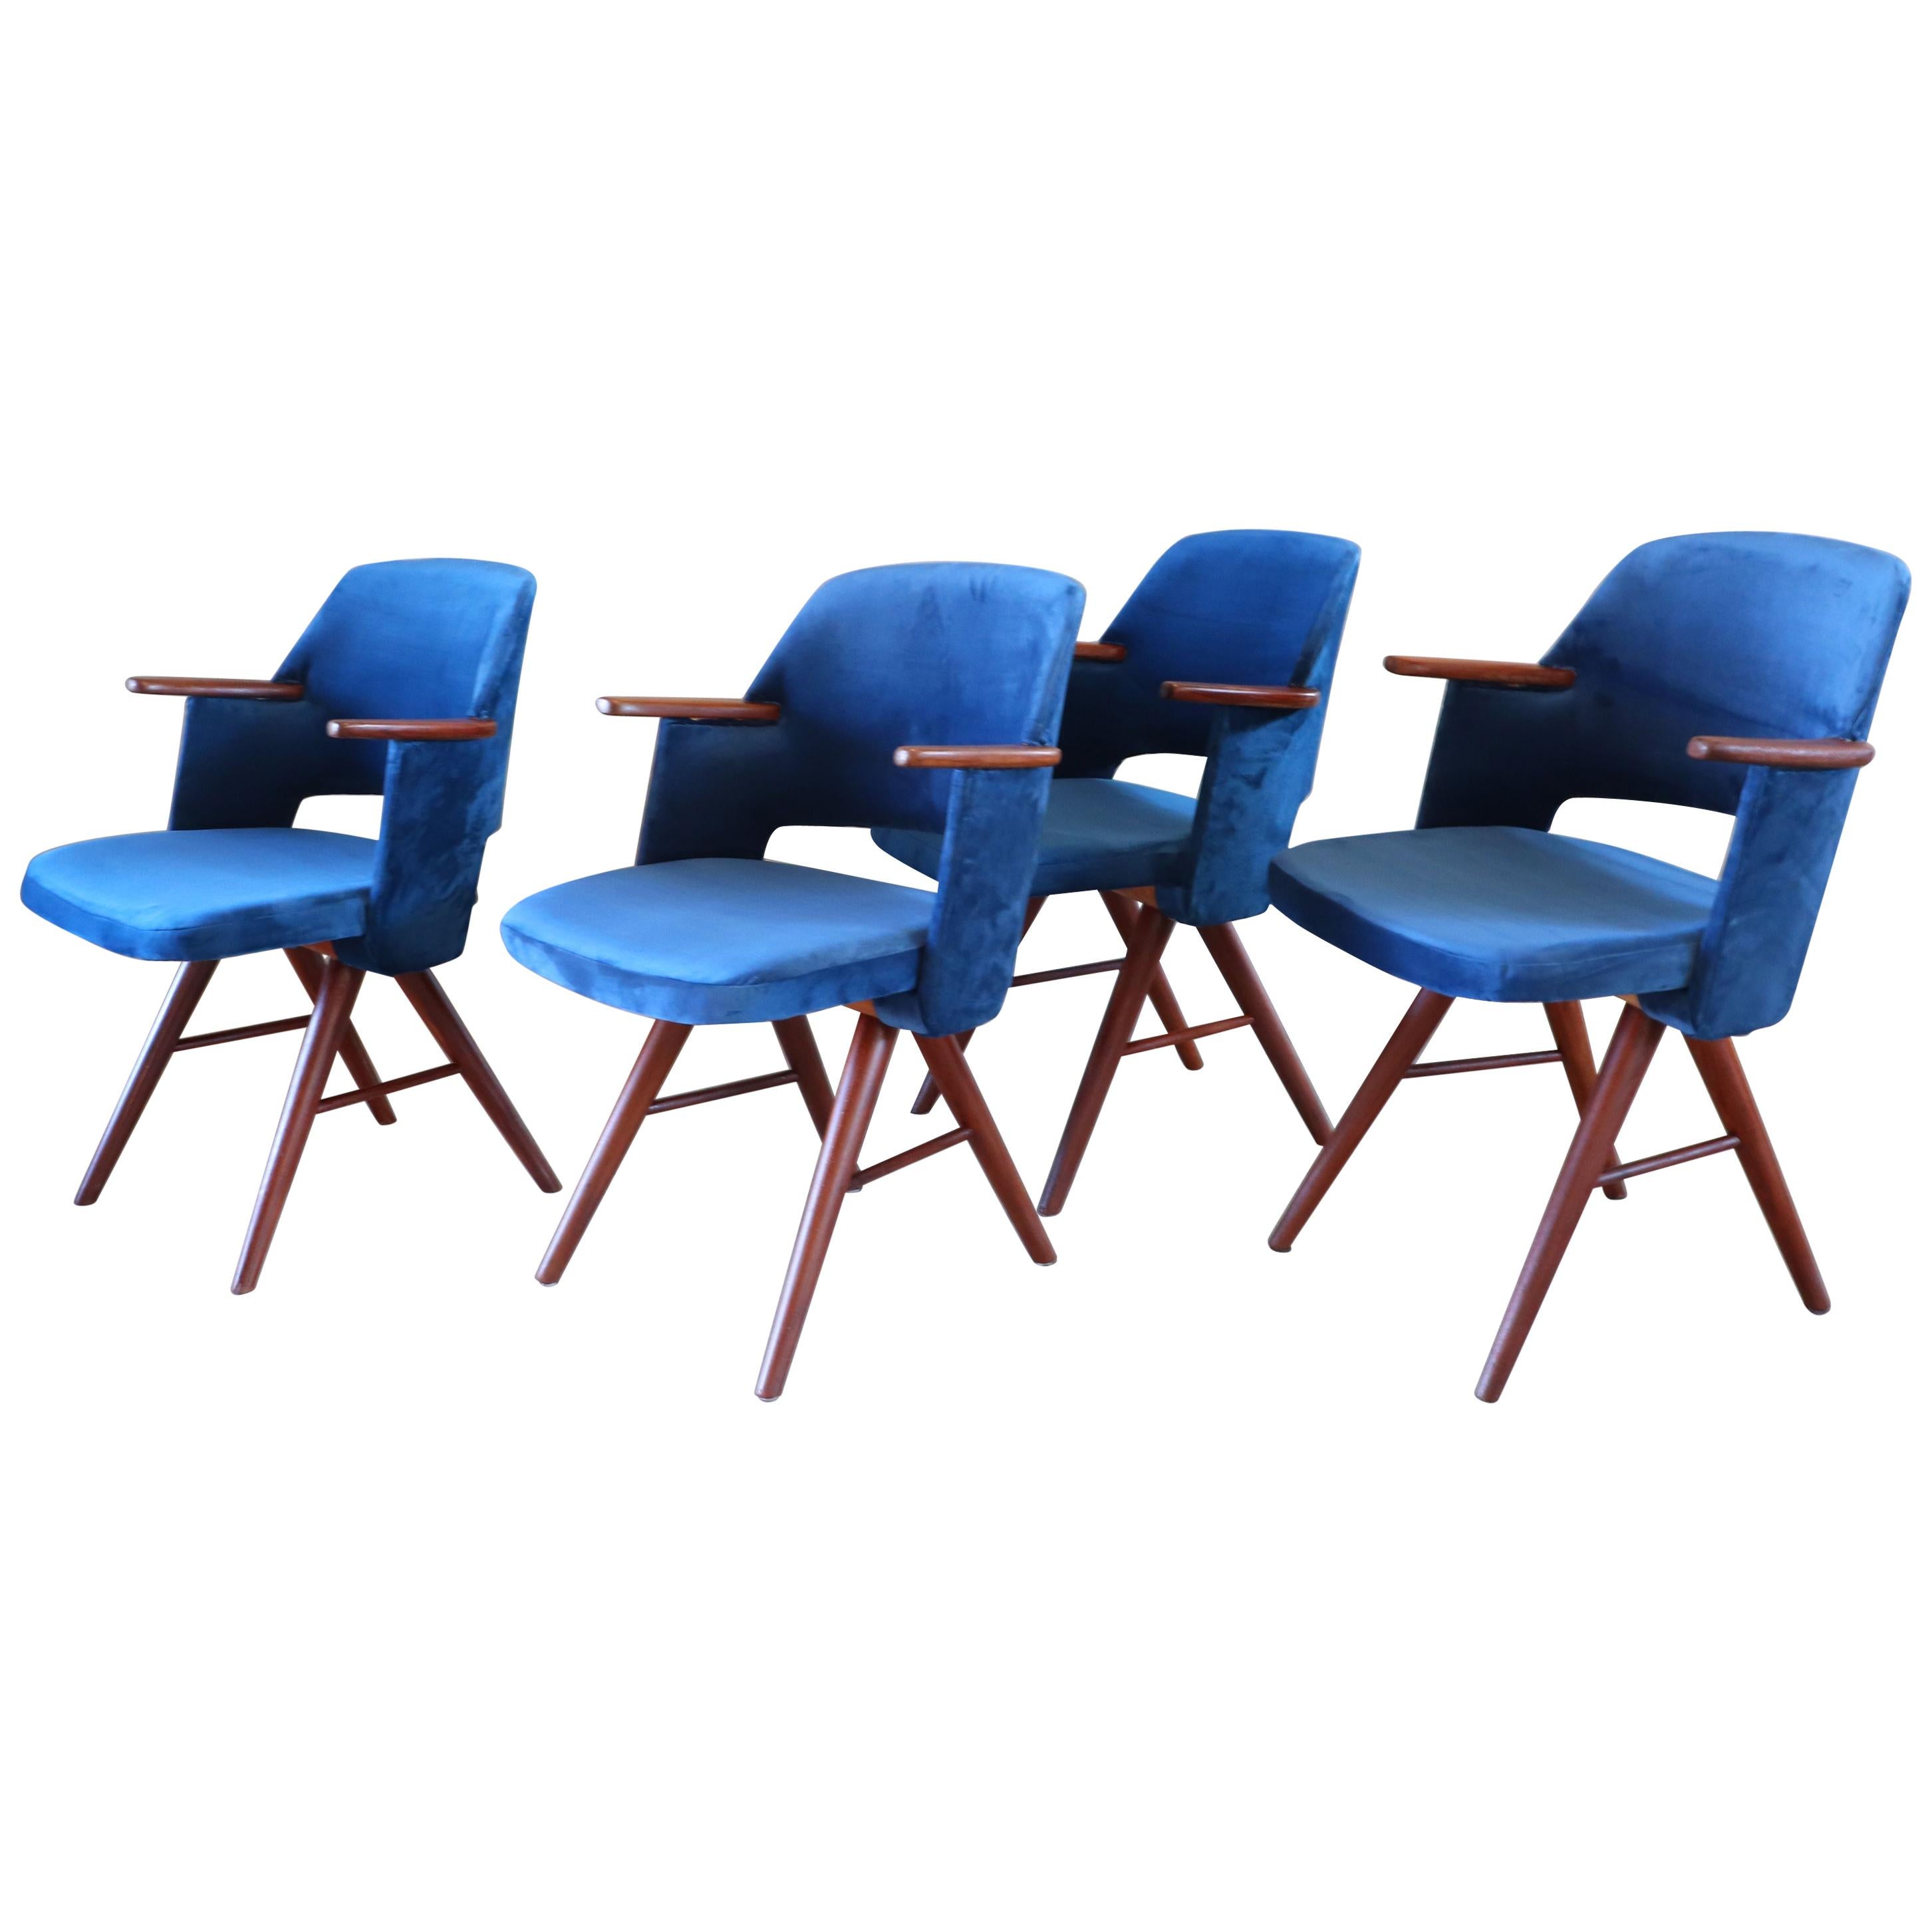 29th Century Teak Dining Chairs by Cees Braakman for Pastoe, 1960 Set of 4